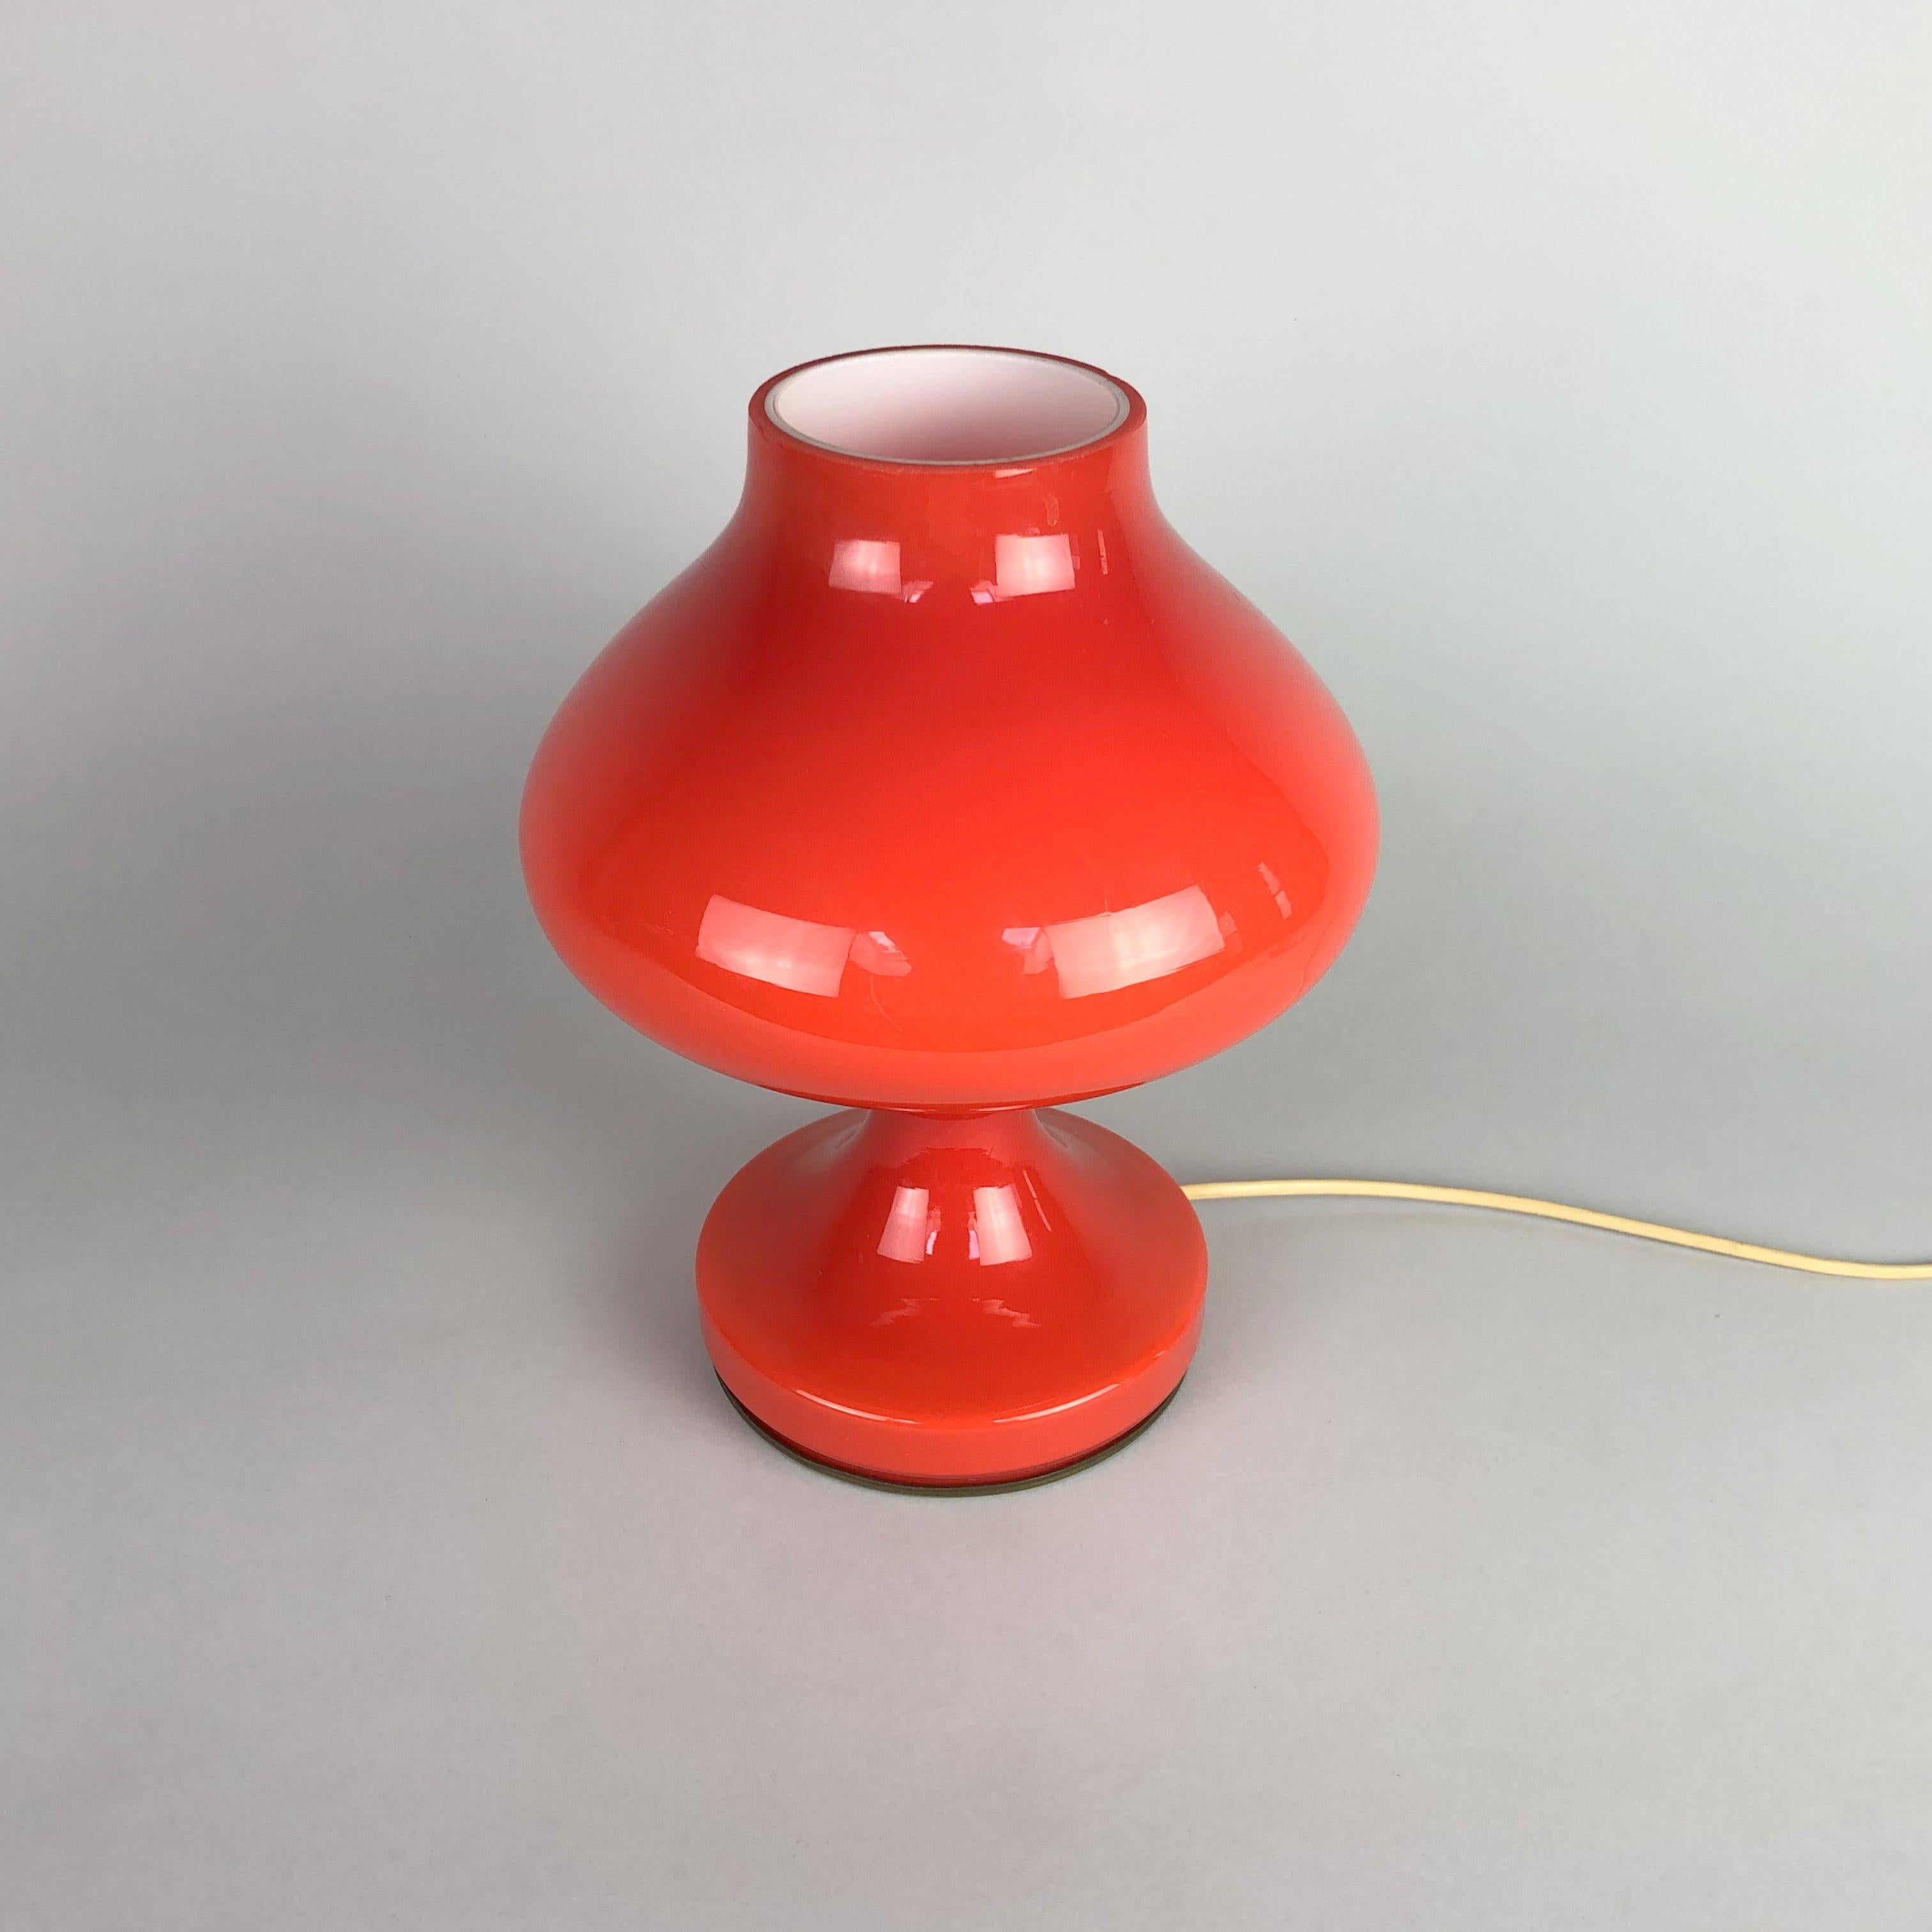 Beautiful vintage glass table lamp designed by Stepan Tabera and produced by the Czechoslovakian company OPP Jihlava in the early 1970s. Two layers of glass - white in the inside, red on the outside. Very good vintage condition. There is one small